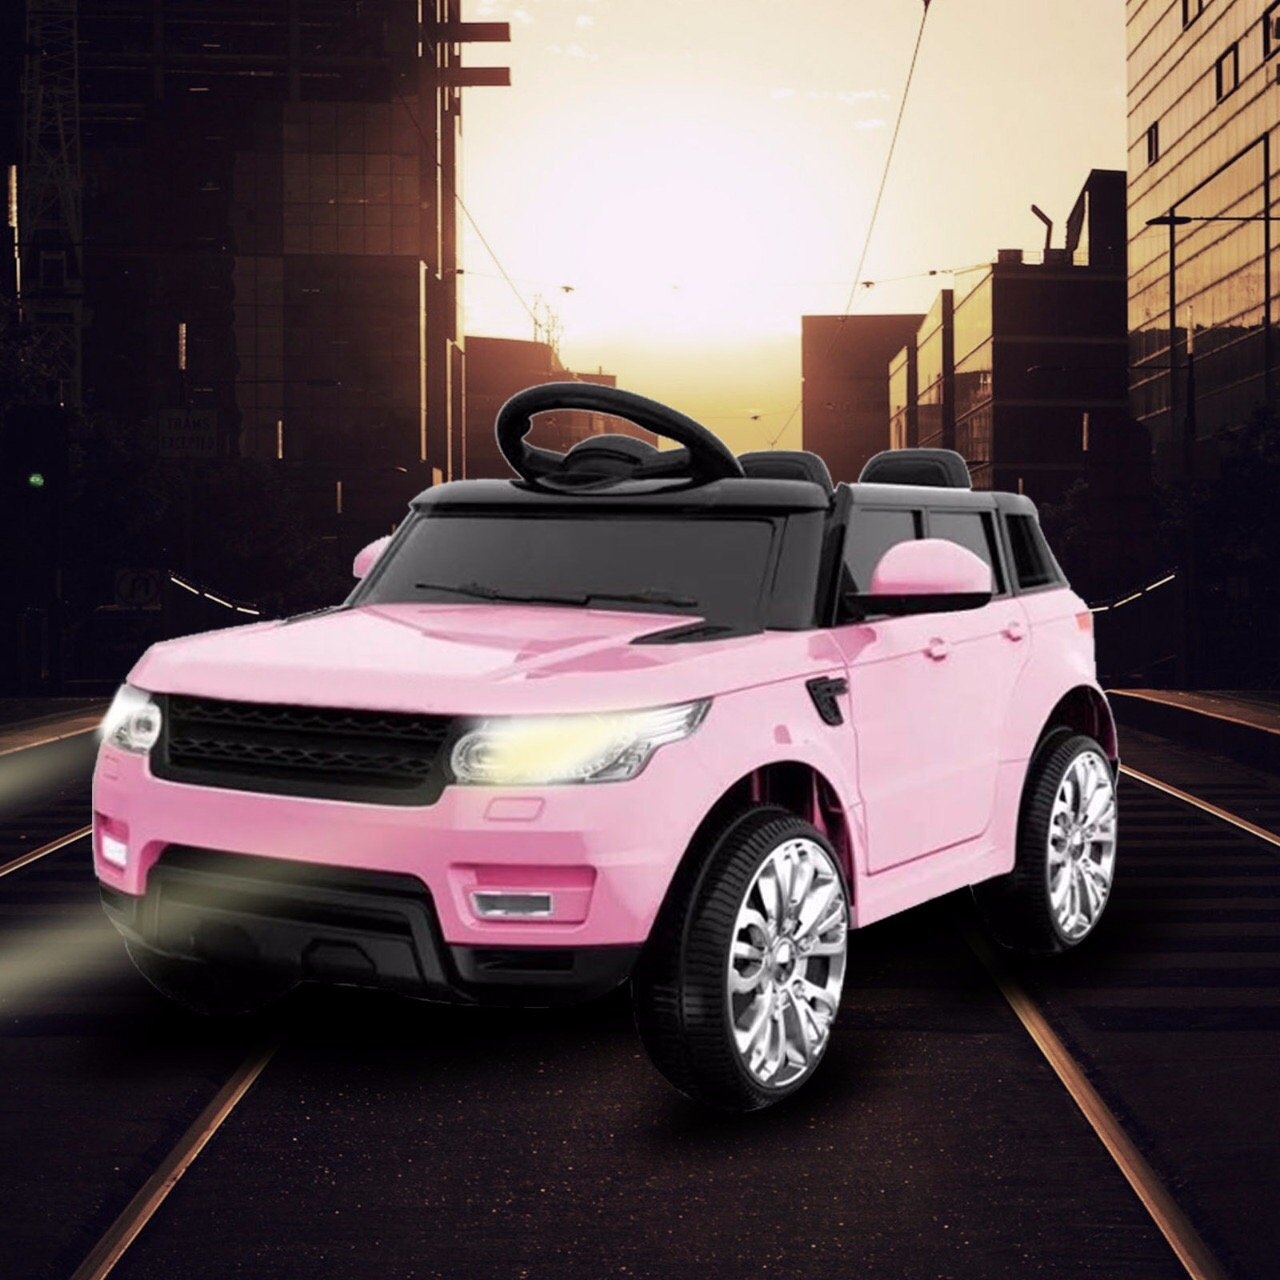 Range Rover HSE Sport style – Pink